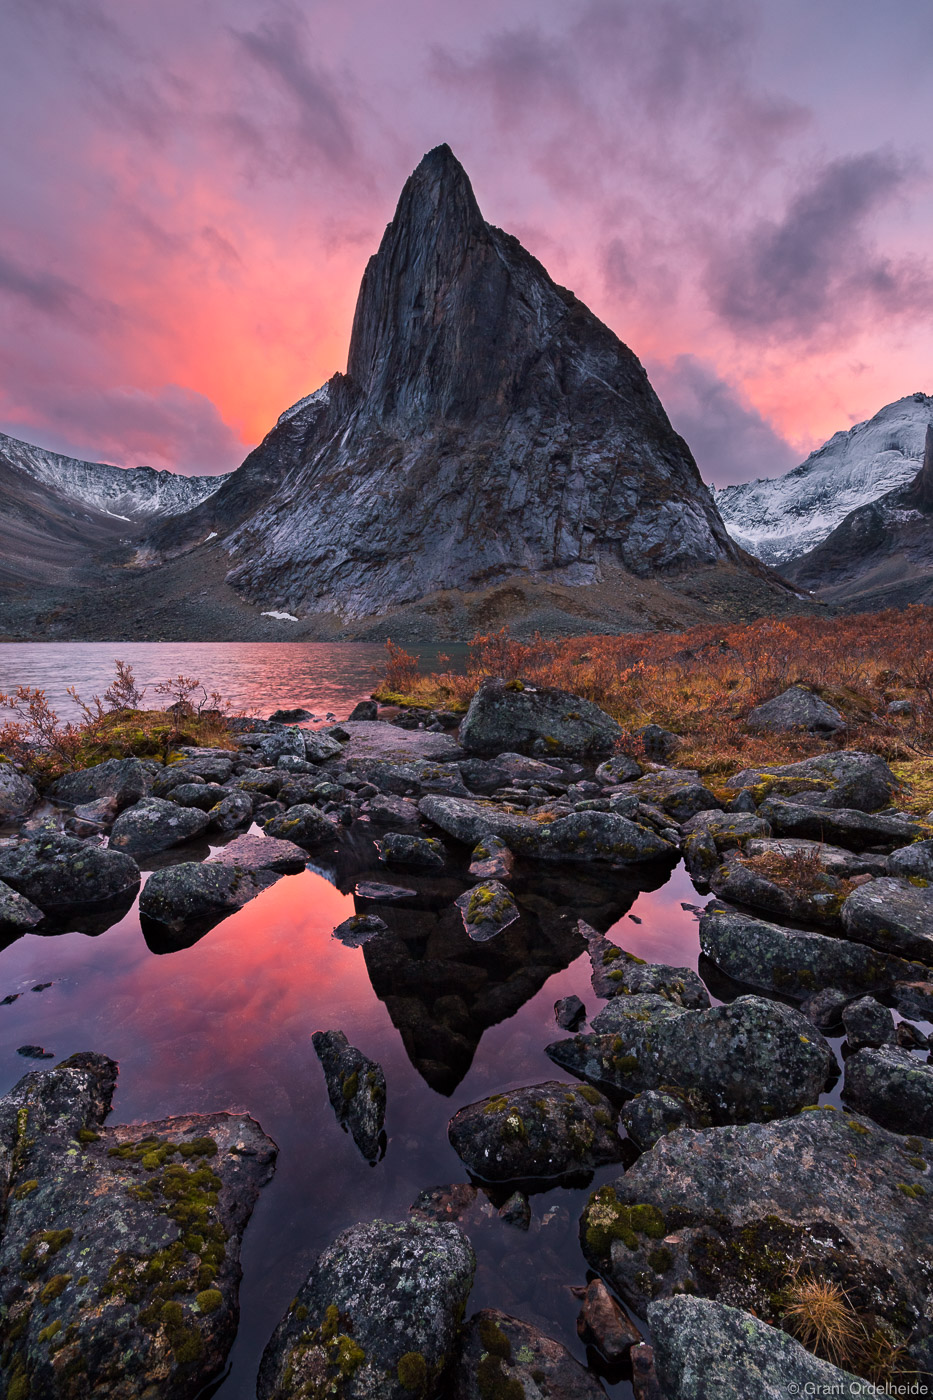 Autumn sunset over a rugged and remote mountain in Tombstone Territorial Park.